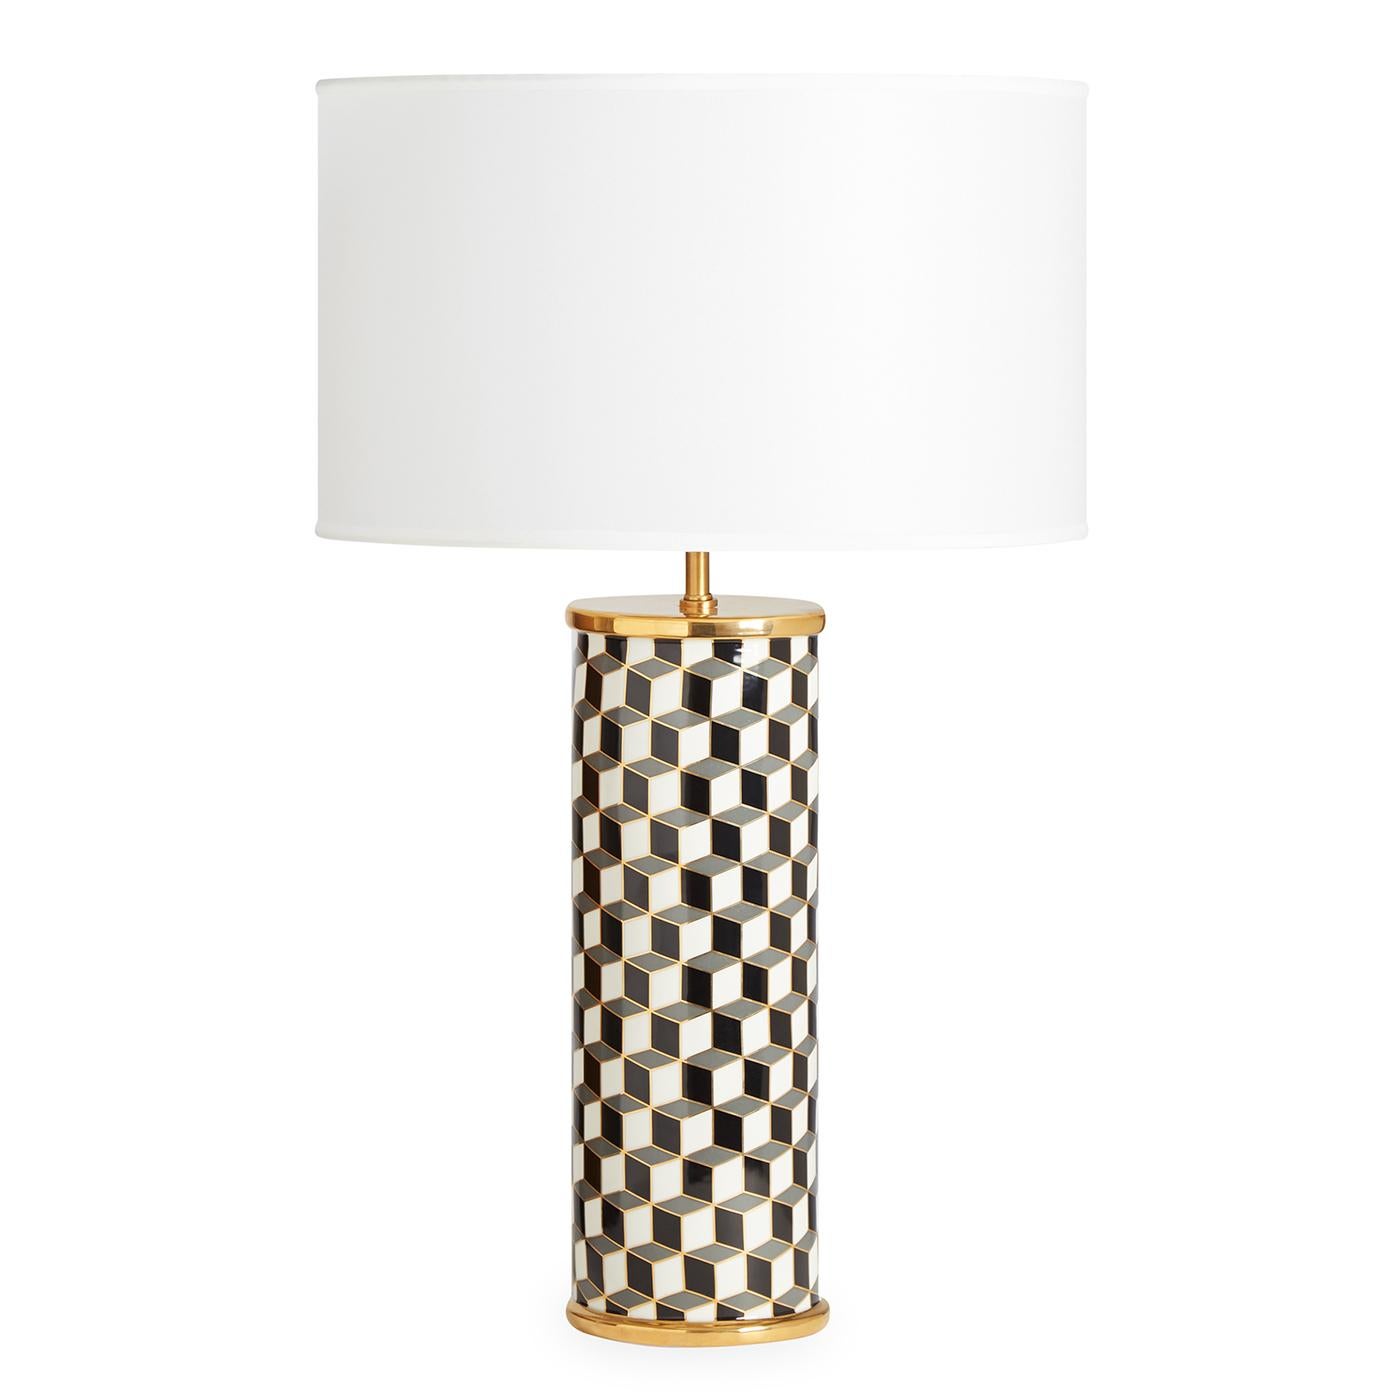 Graphic Pop. A classic cubes pattern in black and grey with gold accents for a spot of sparkle. Our porcelain and polished brass Carnaby Lamp combines a dash of downtown with a touch of uptown élan. A graphic addition to any tabletop, its large